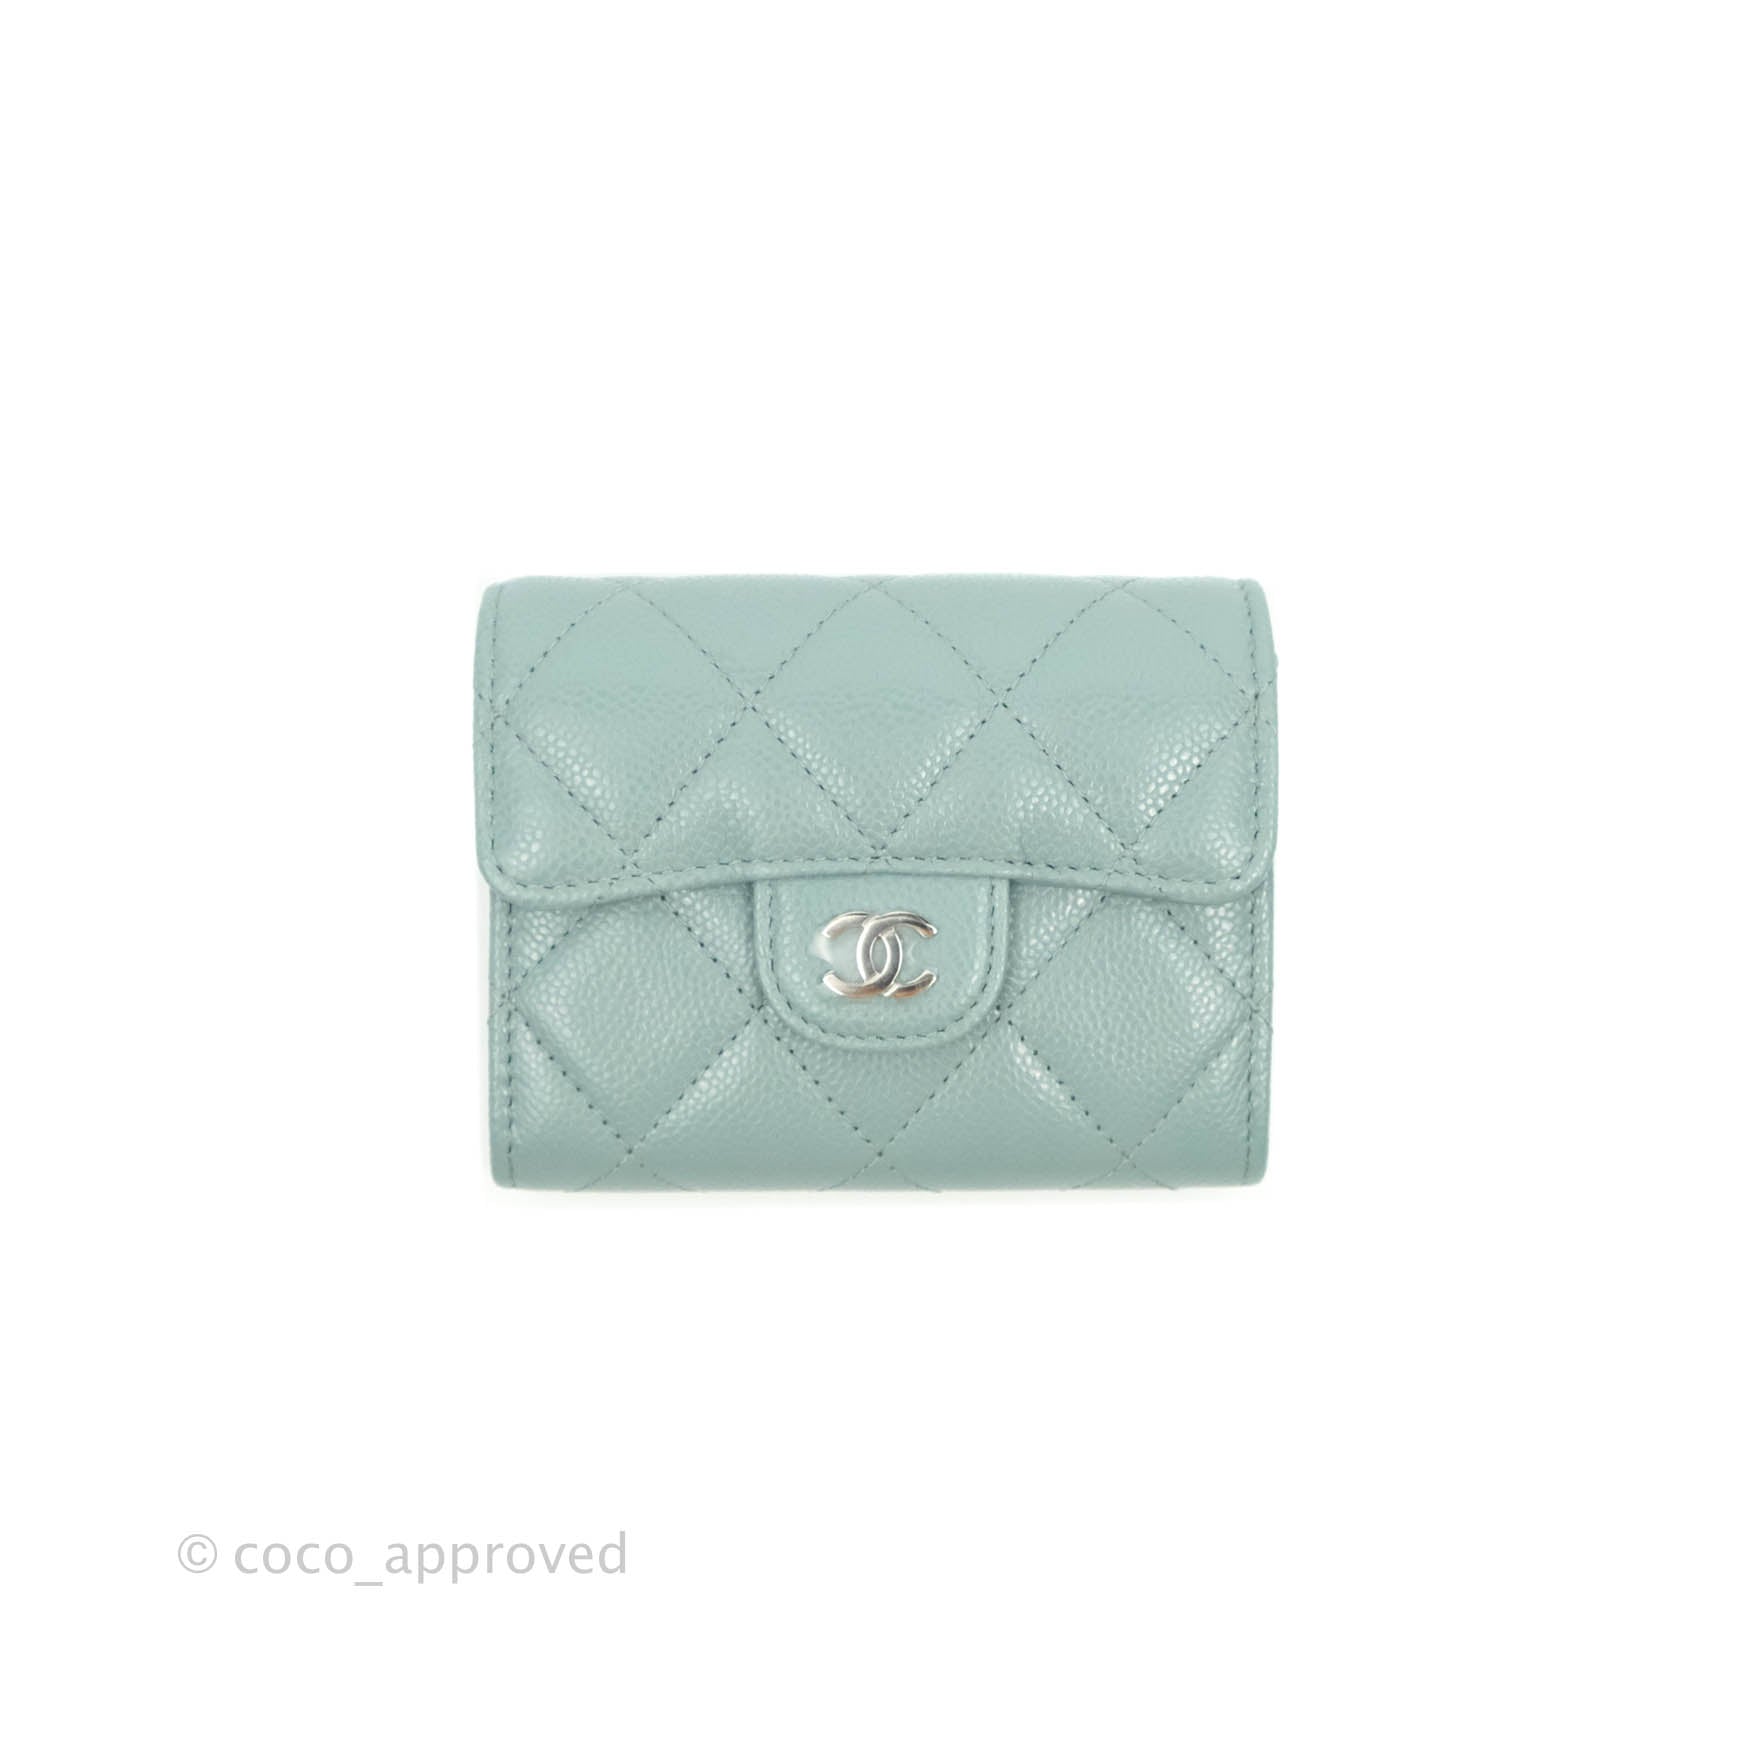 Chanel Mini Wallet With Chain White Caviar Gold Hardware – Coco Approved  Studio